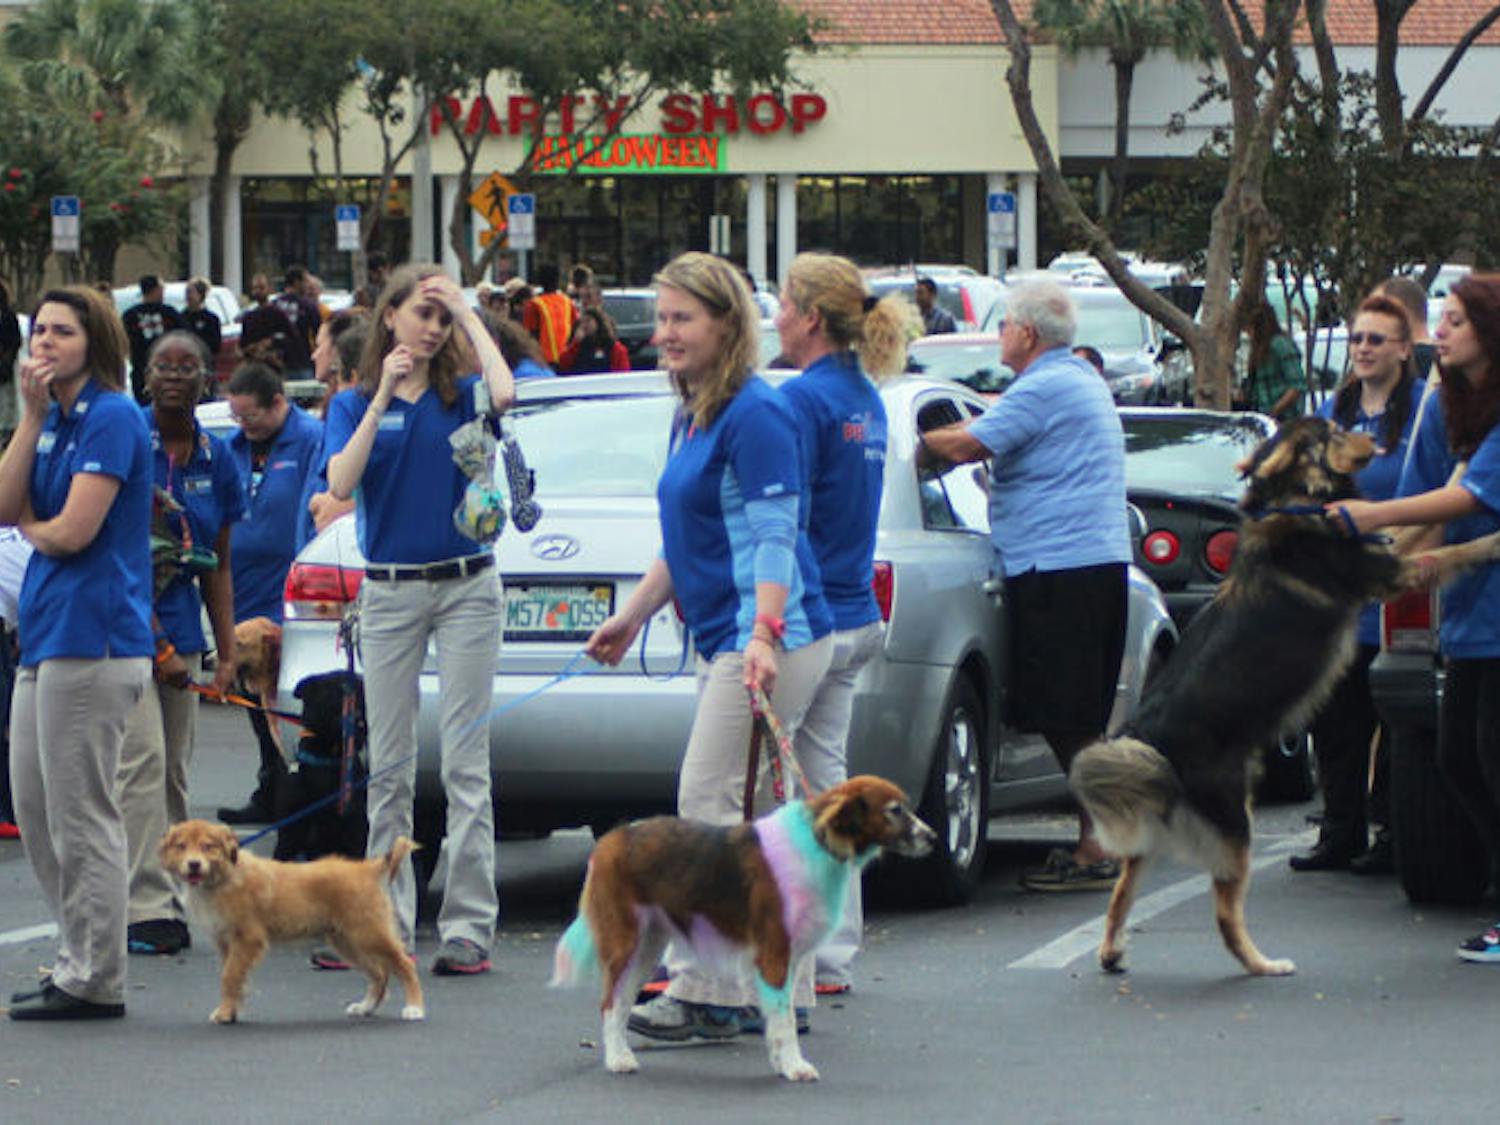 PetSmart employees and dogs stand in the parking lot after evacuating Monday while Gainesville Fire Rescue and Alachua County Fire Rescue work to extinguish the fire.